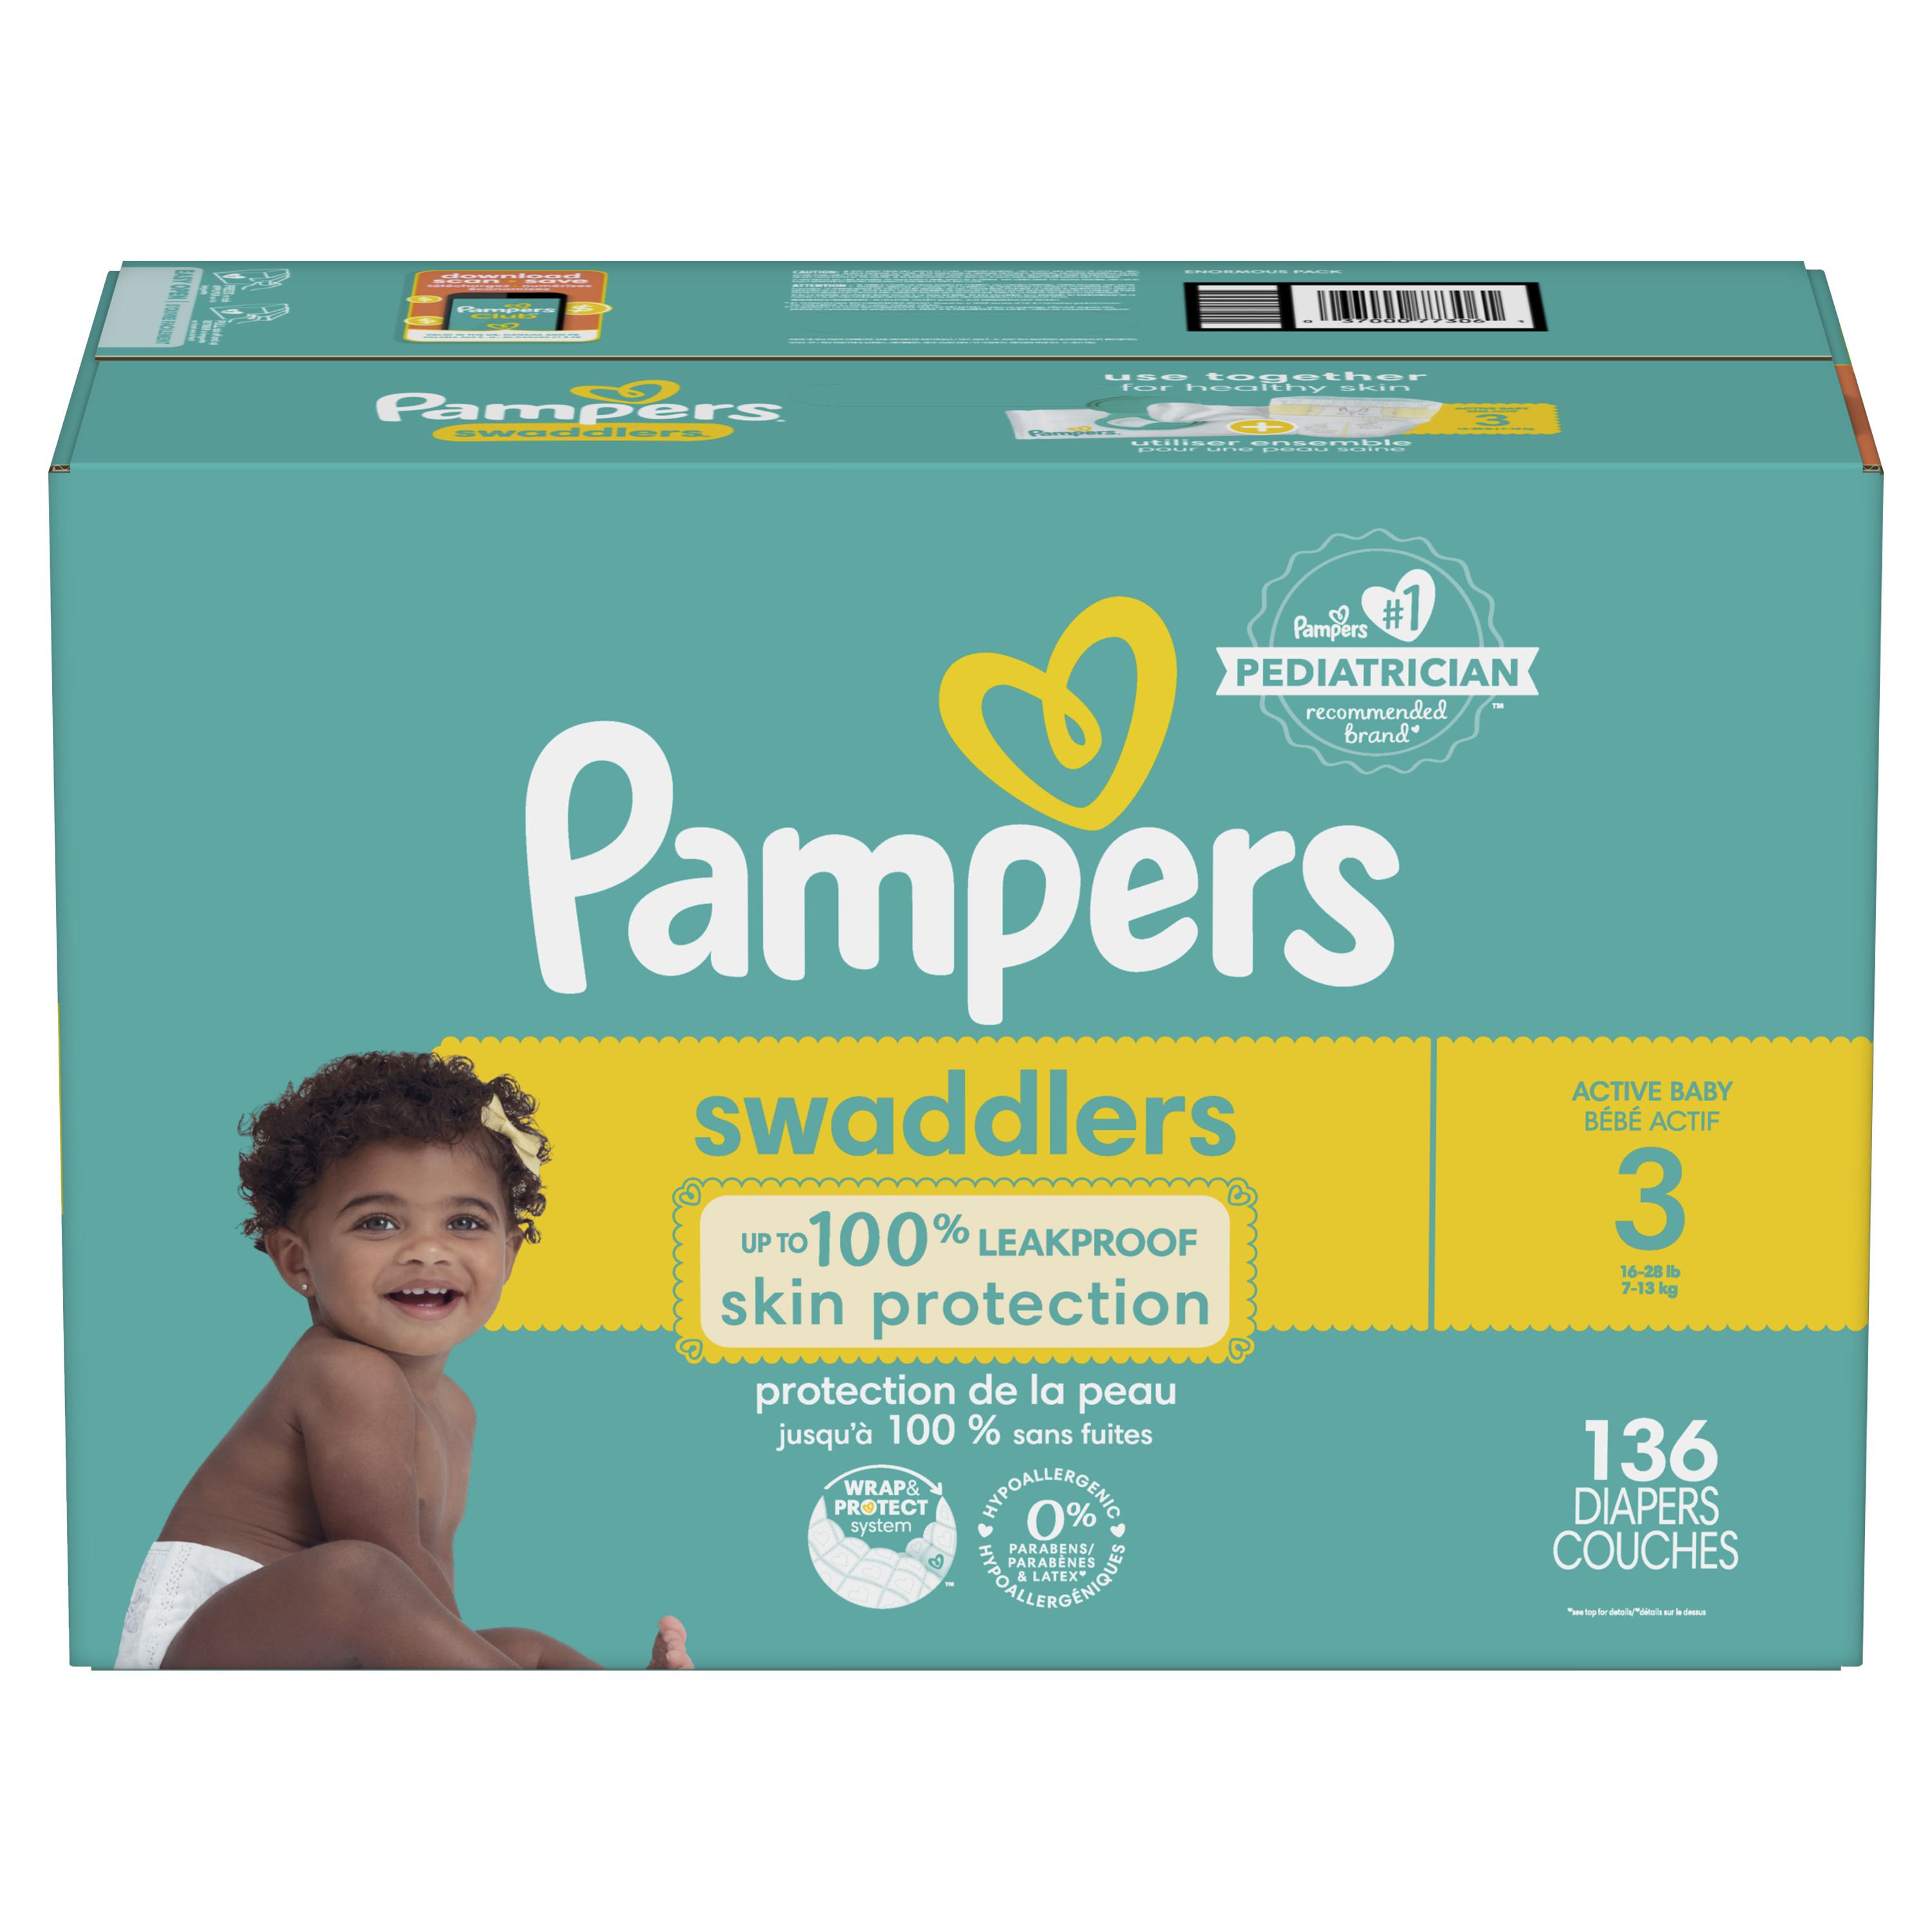 Pampers Swaddlers Diapers Size 3, 136 Count (Select for More Options) - image 3 of 13